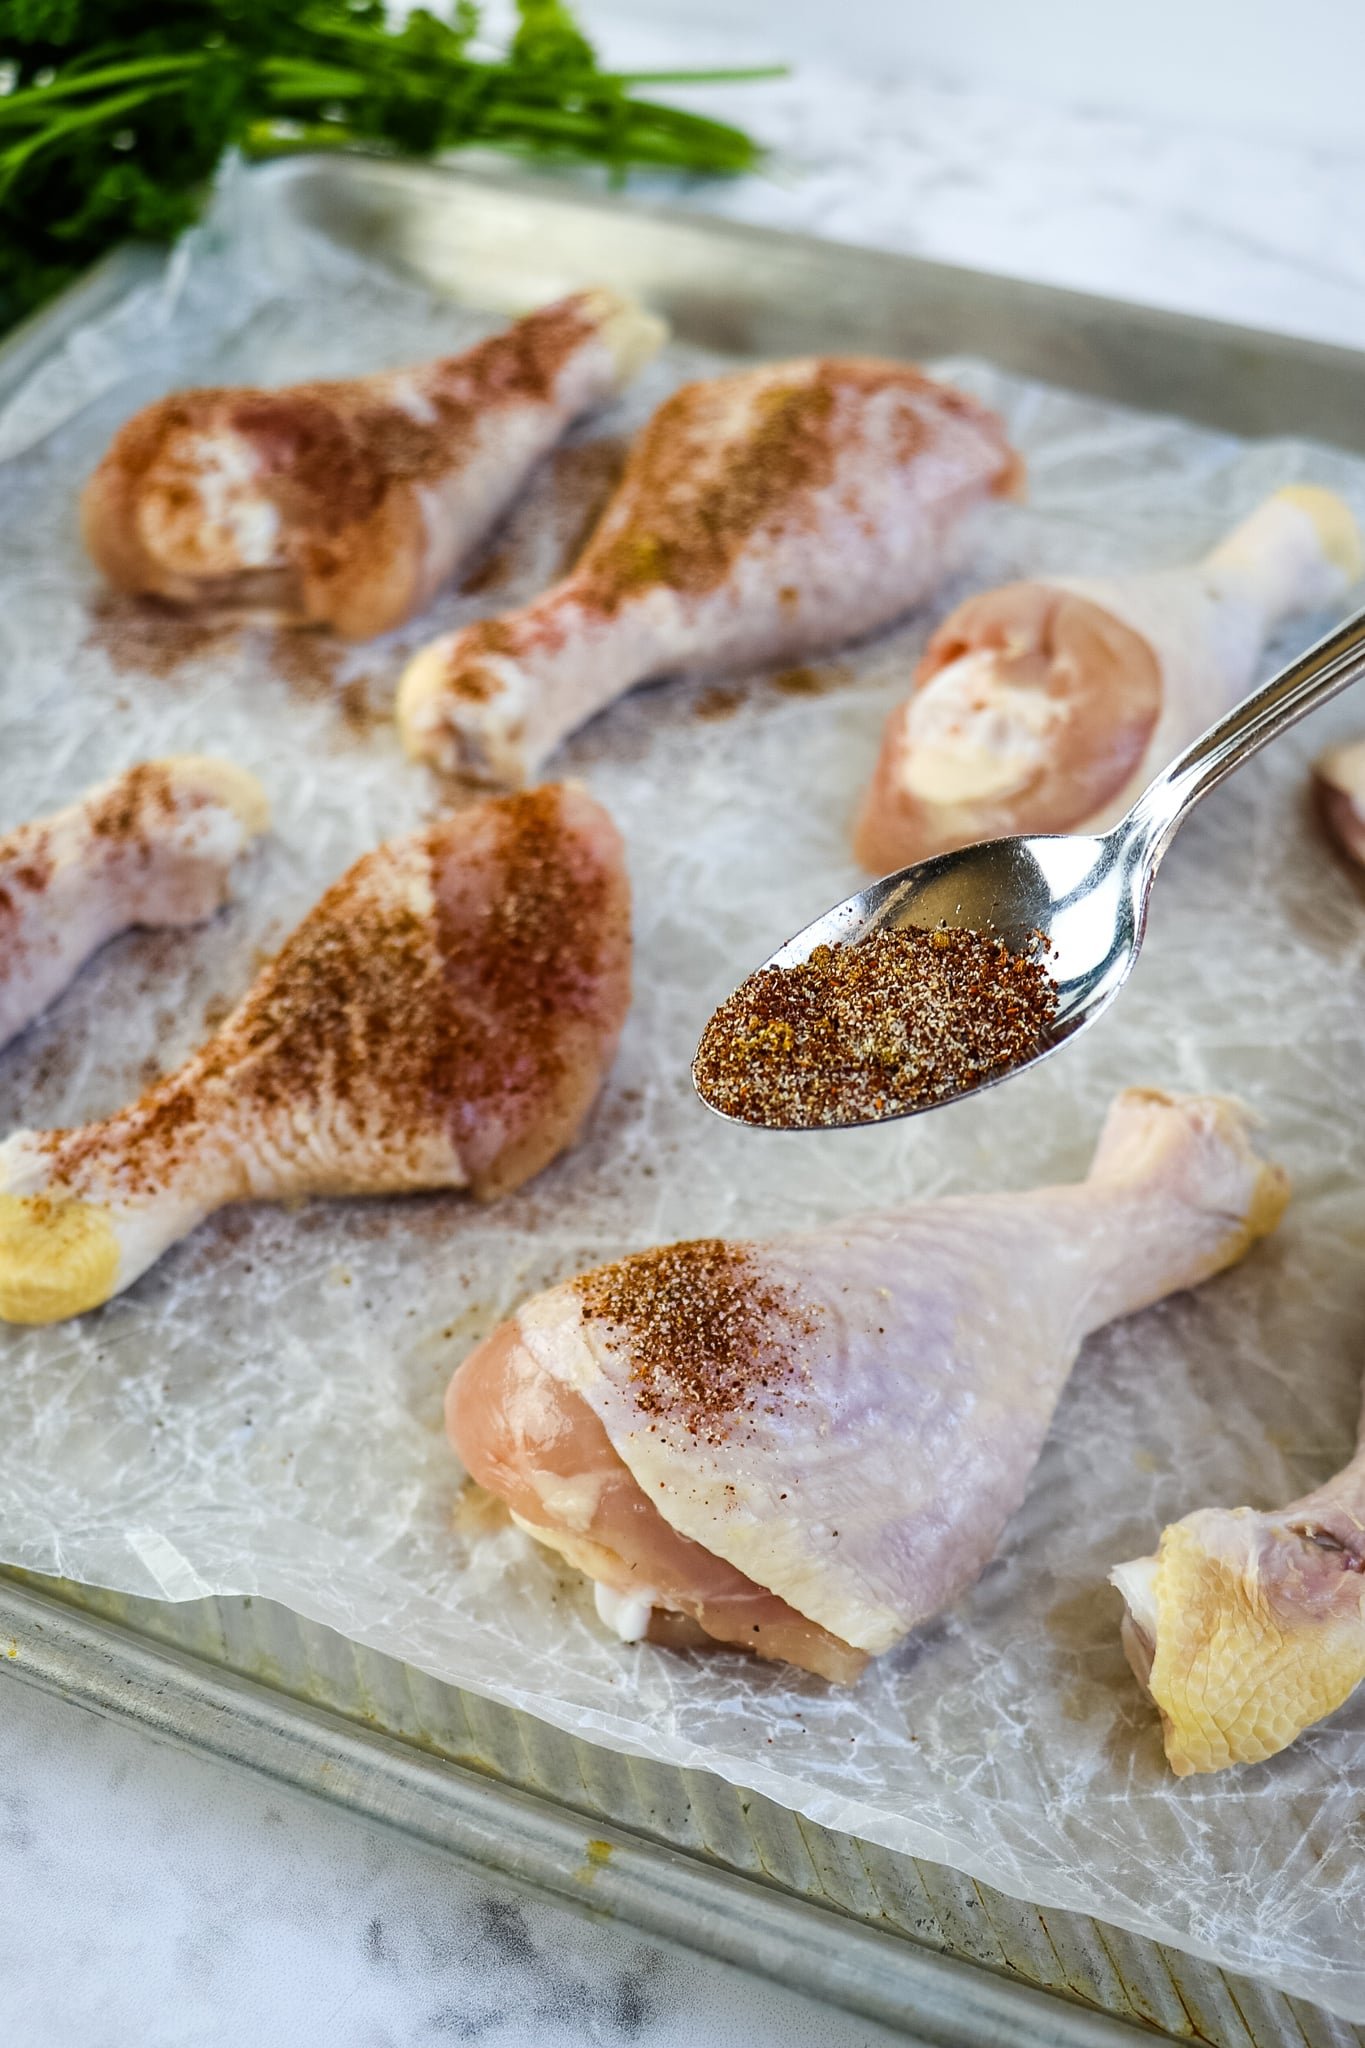 Seasoning being added to chicken legs on a sheetpan.